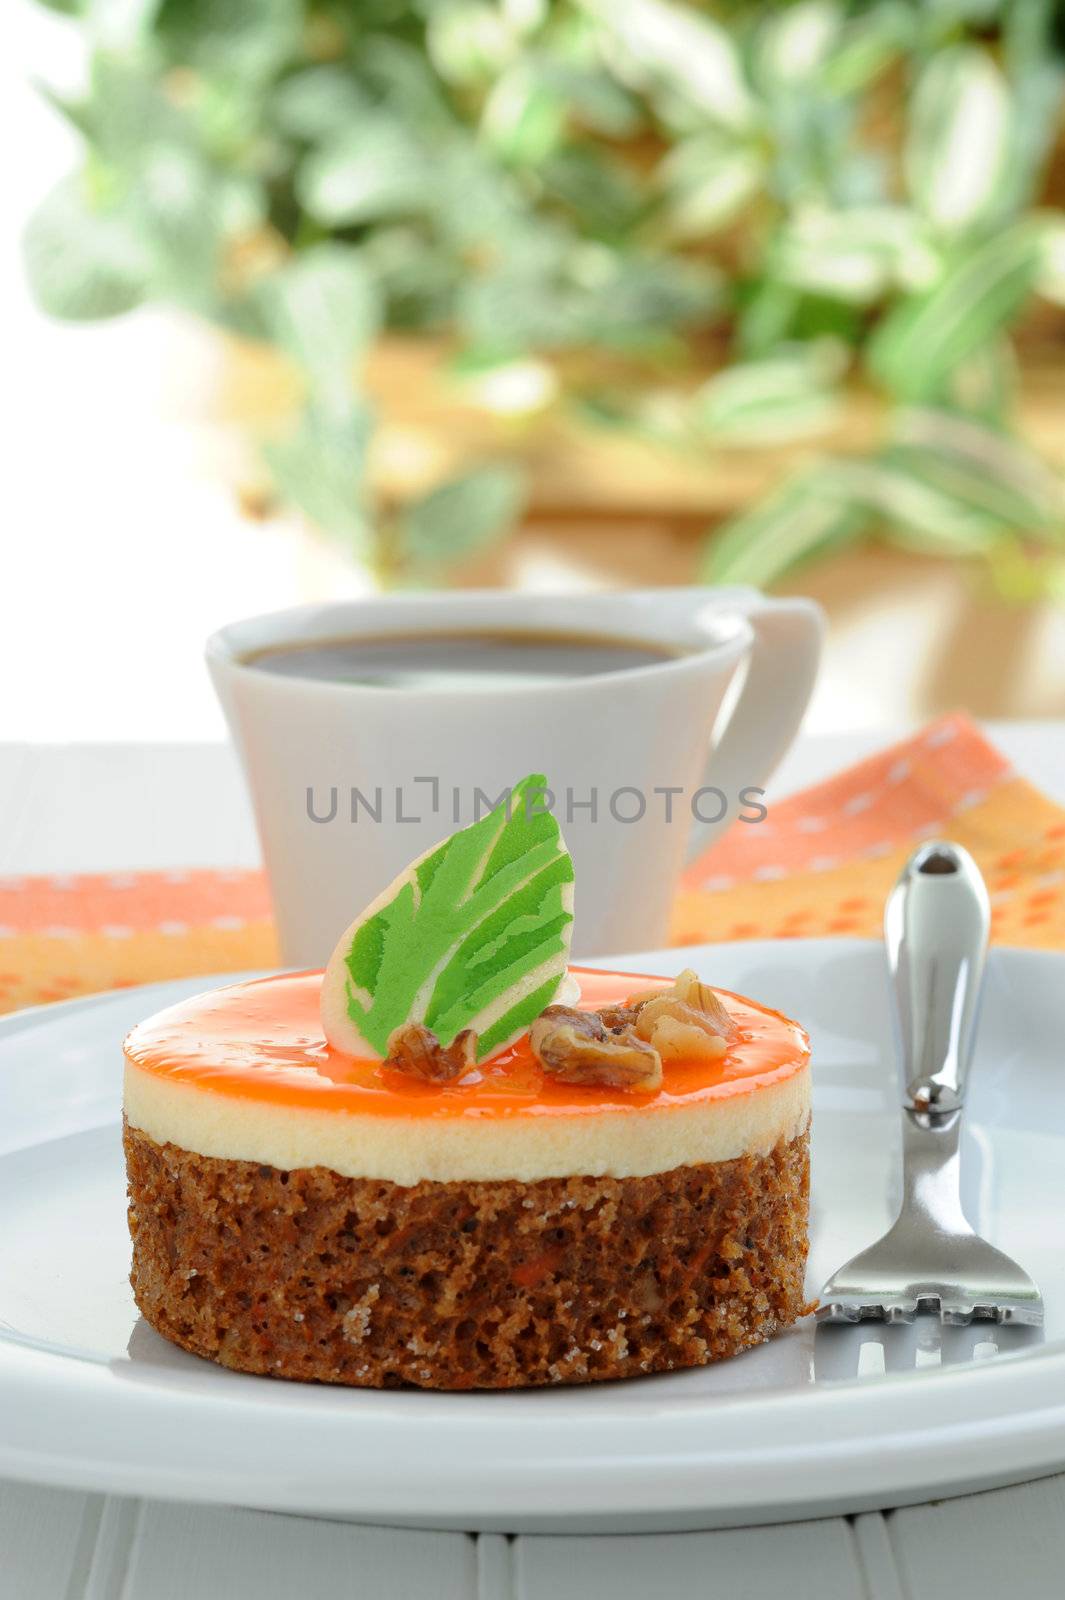 A serving of an nontraditional carrot cake and coffee.